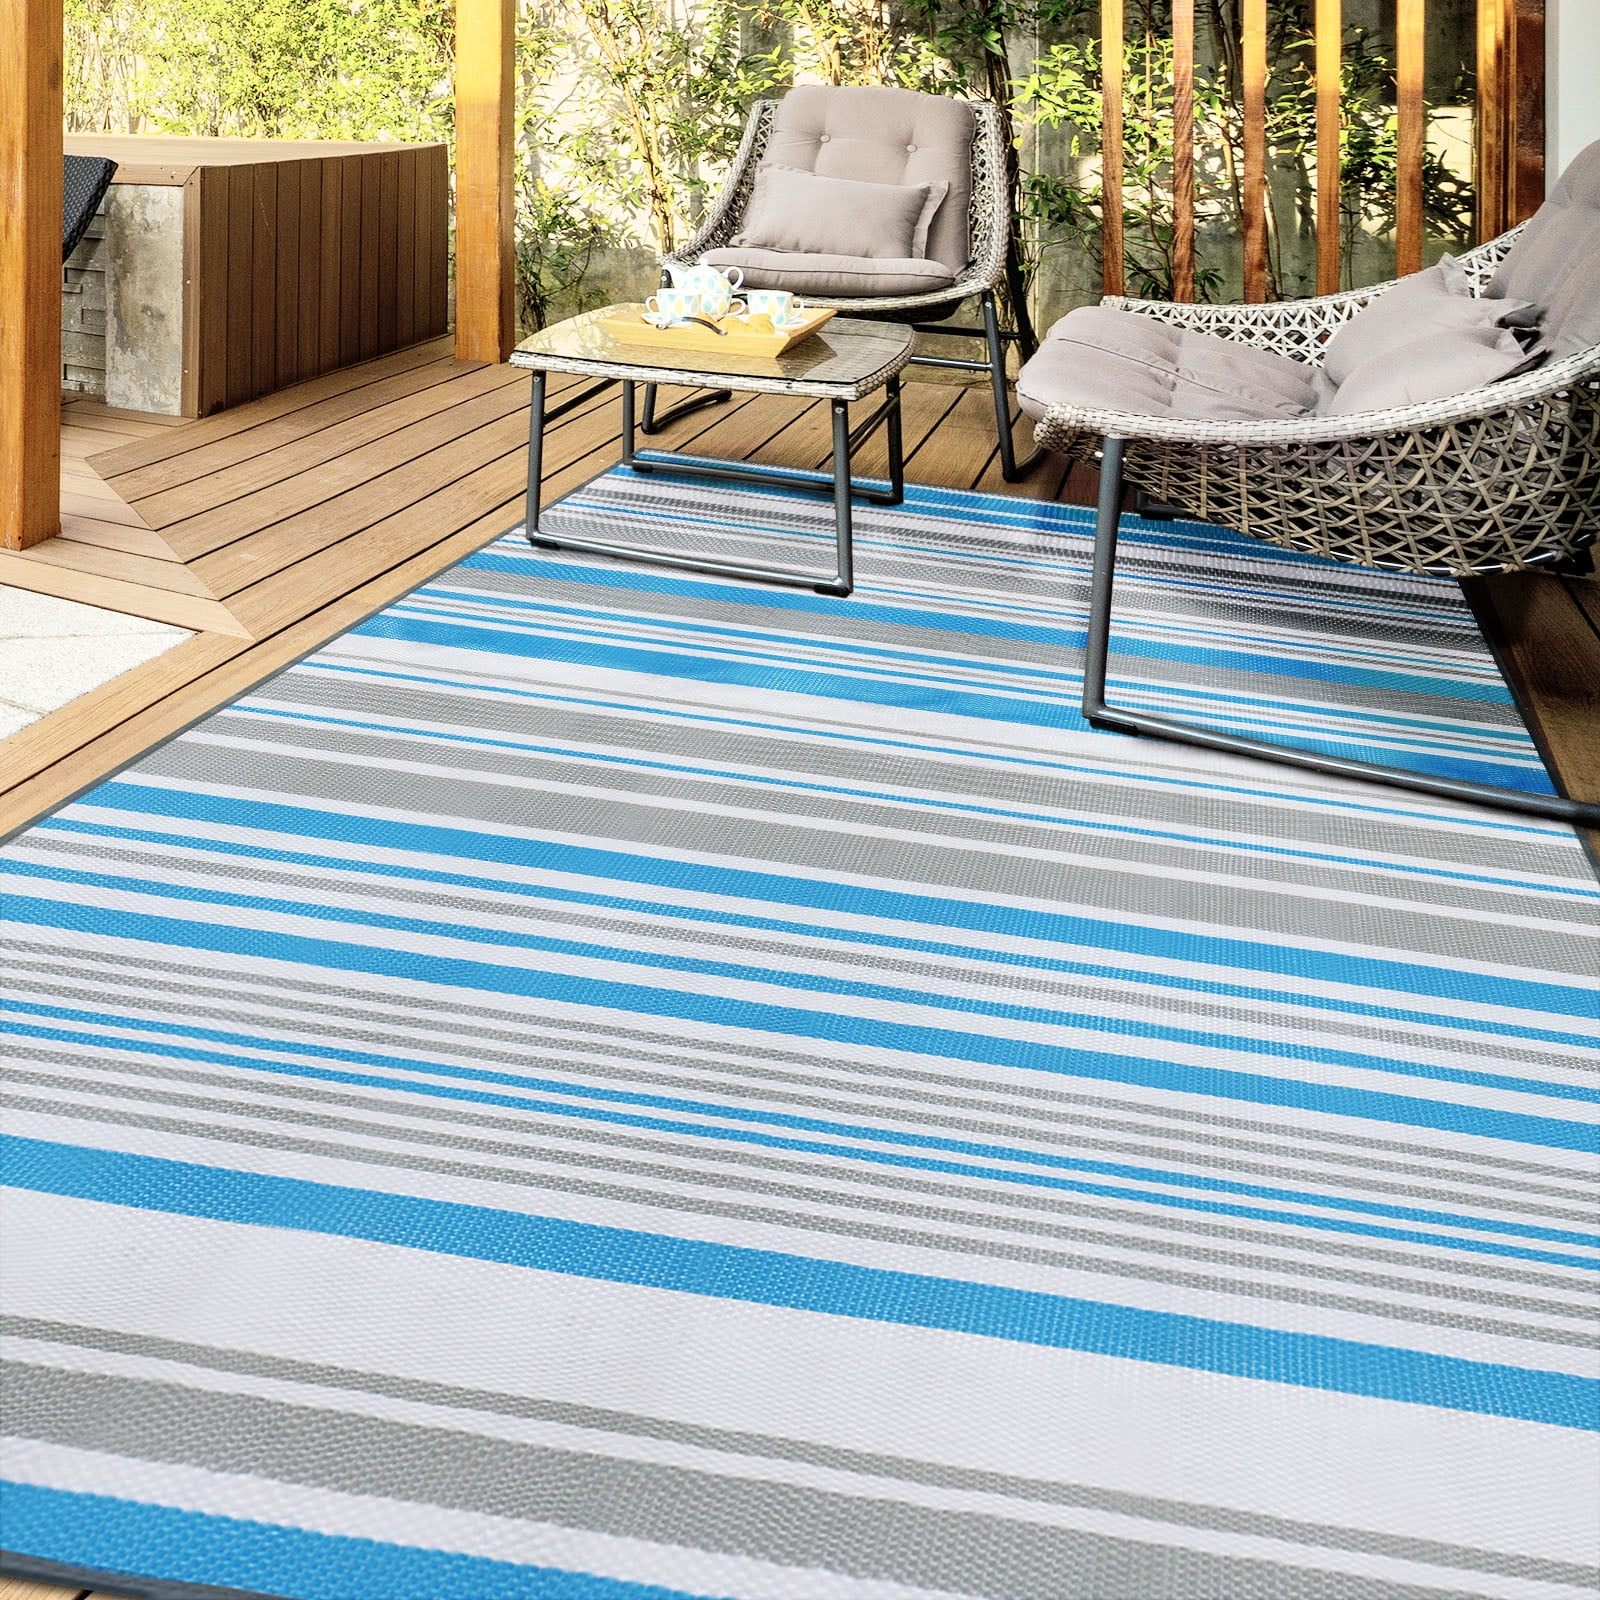 LEEVAN Black and White Outdoor Rug 4x6, Cotton Washable Outdoor Patio Rug,  Black Striped Reversible Rug for Balcony Decor, Woven Durable Entryway Rug